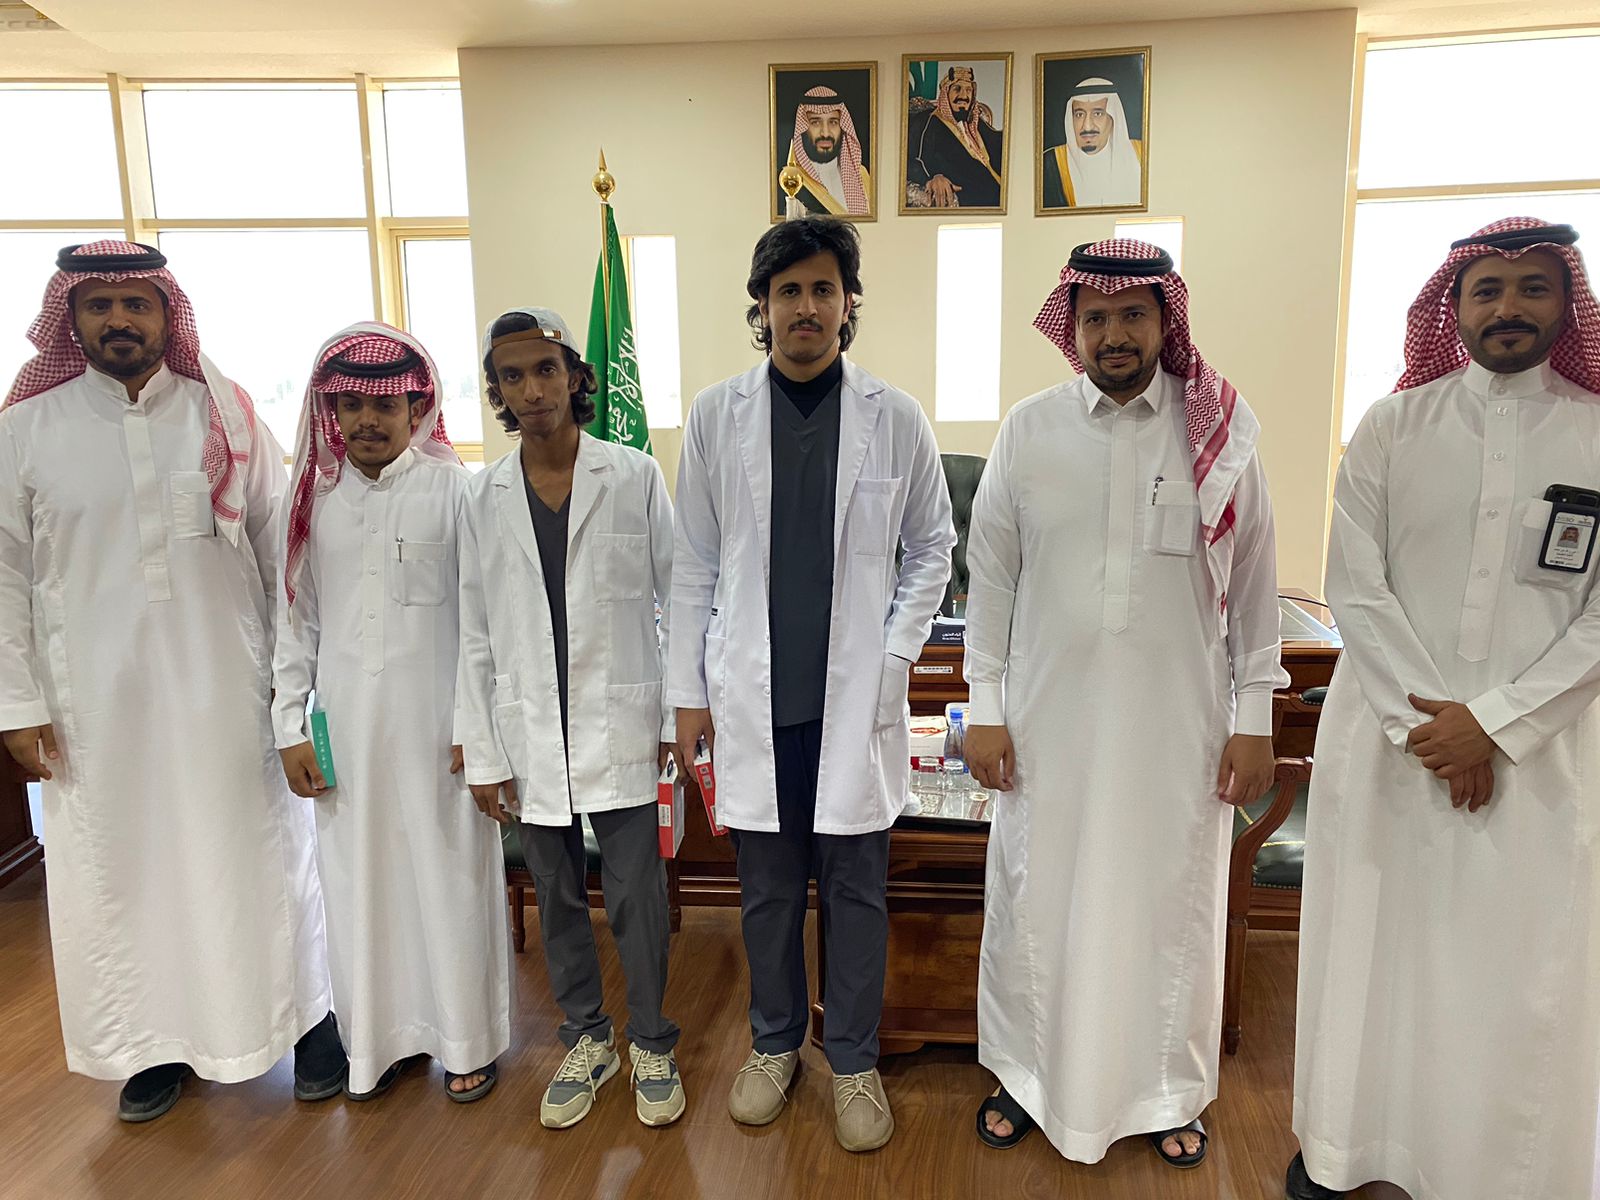 The Student Branch of the Applied College honored the students who participated in the college's competition to celebrate the founding day under the slogan 